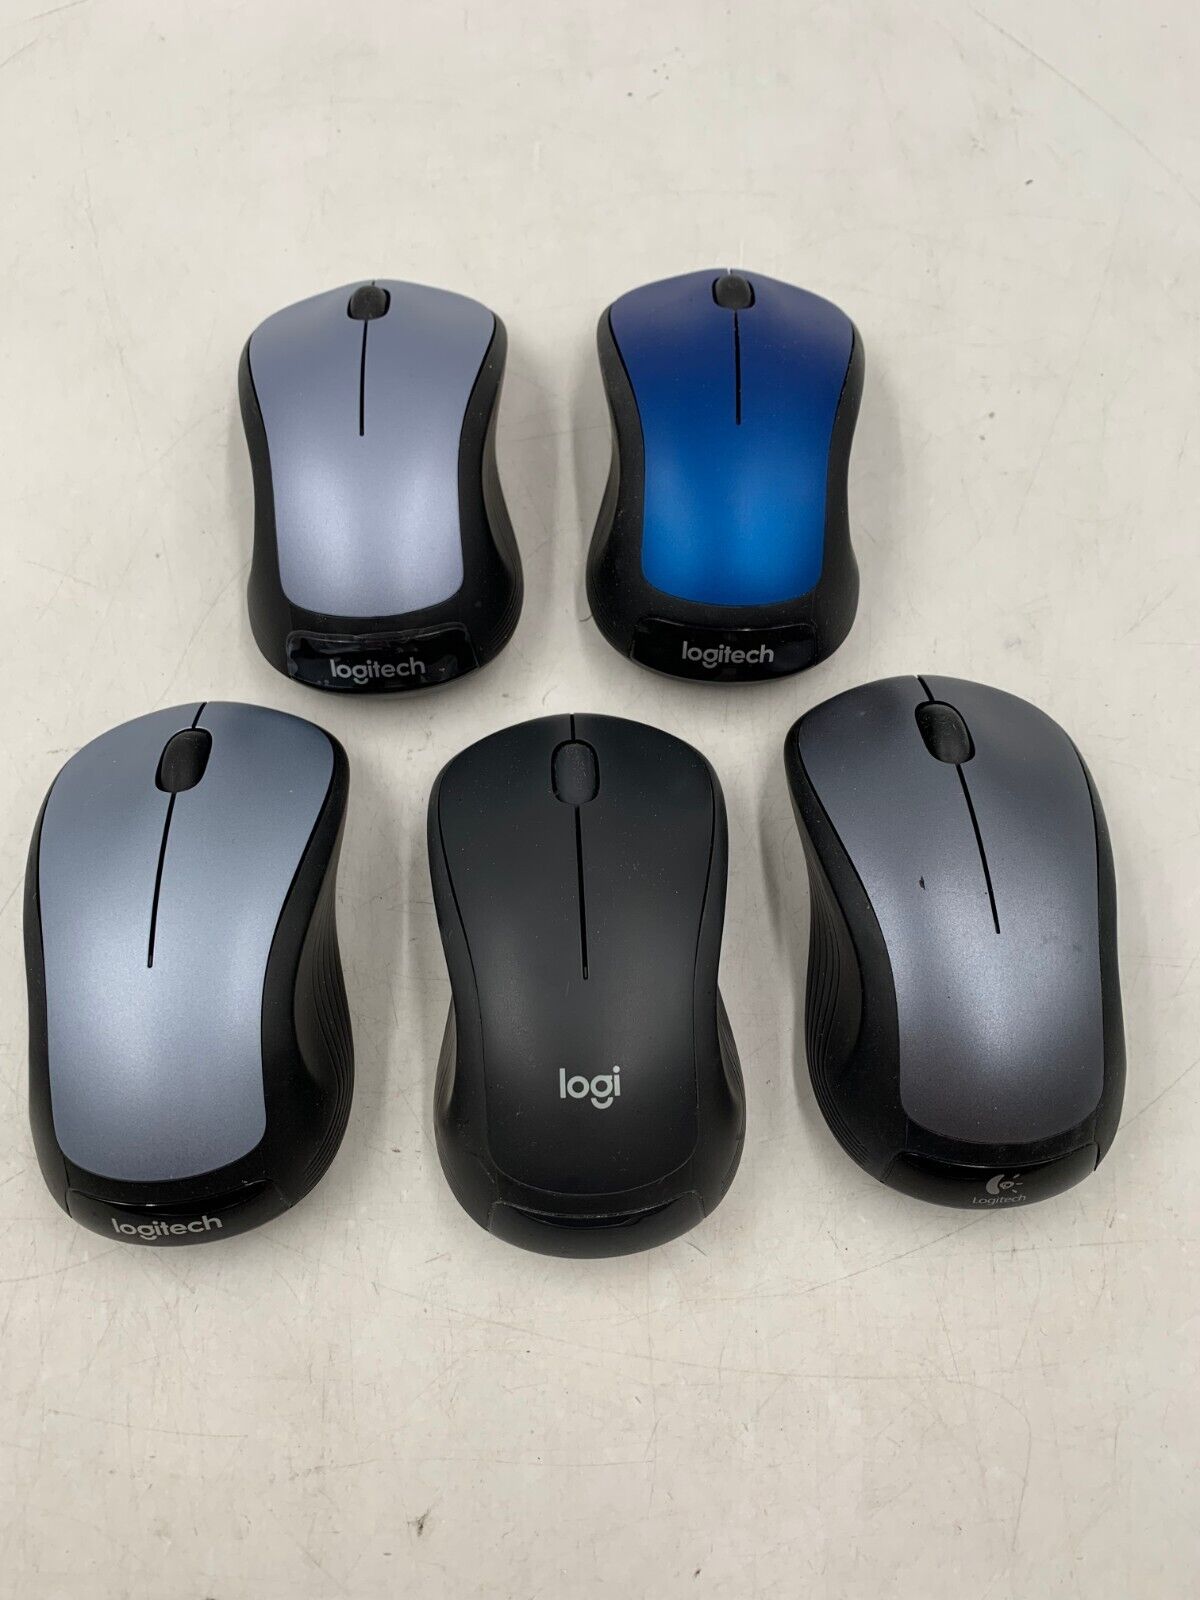 Mixed lot of 5 Logitech M310 Wireless Mouse w/o Unifying Receiver 